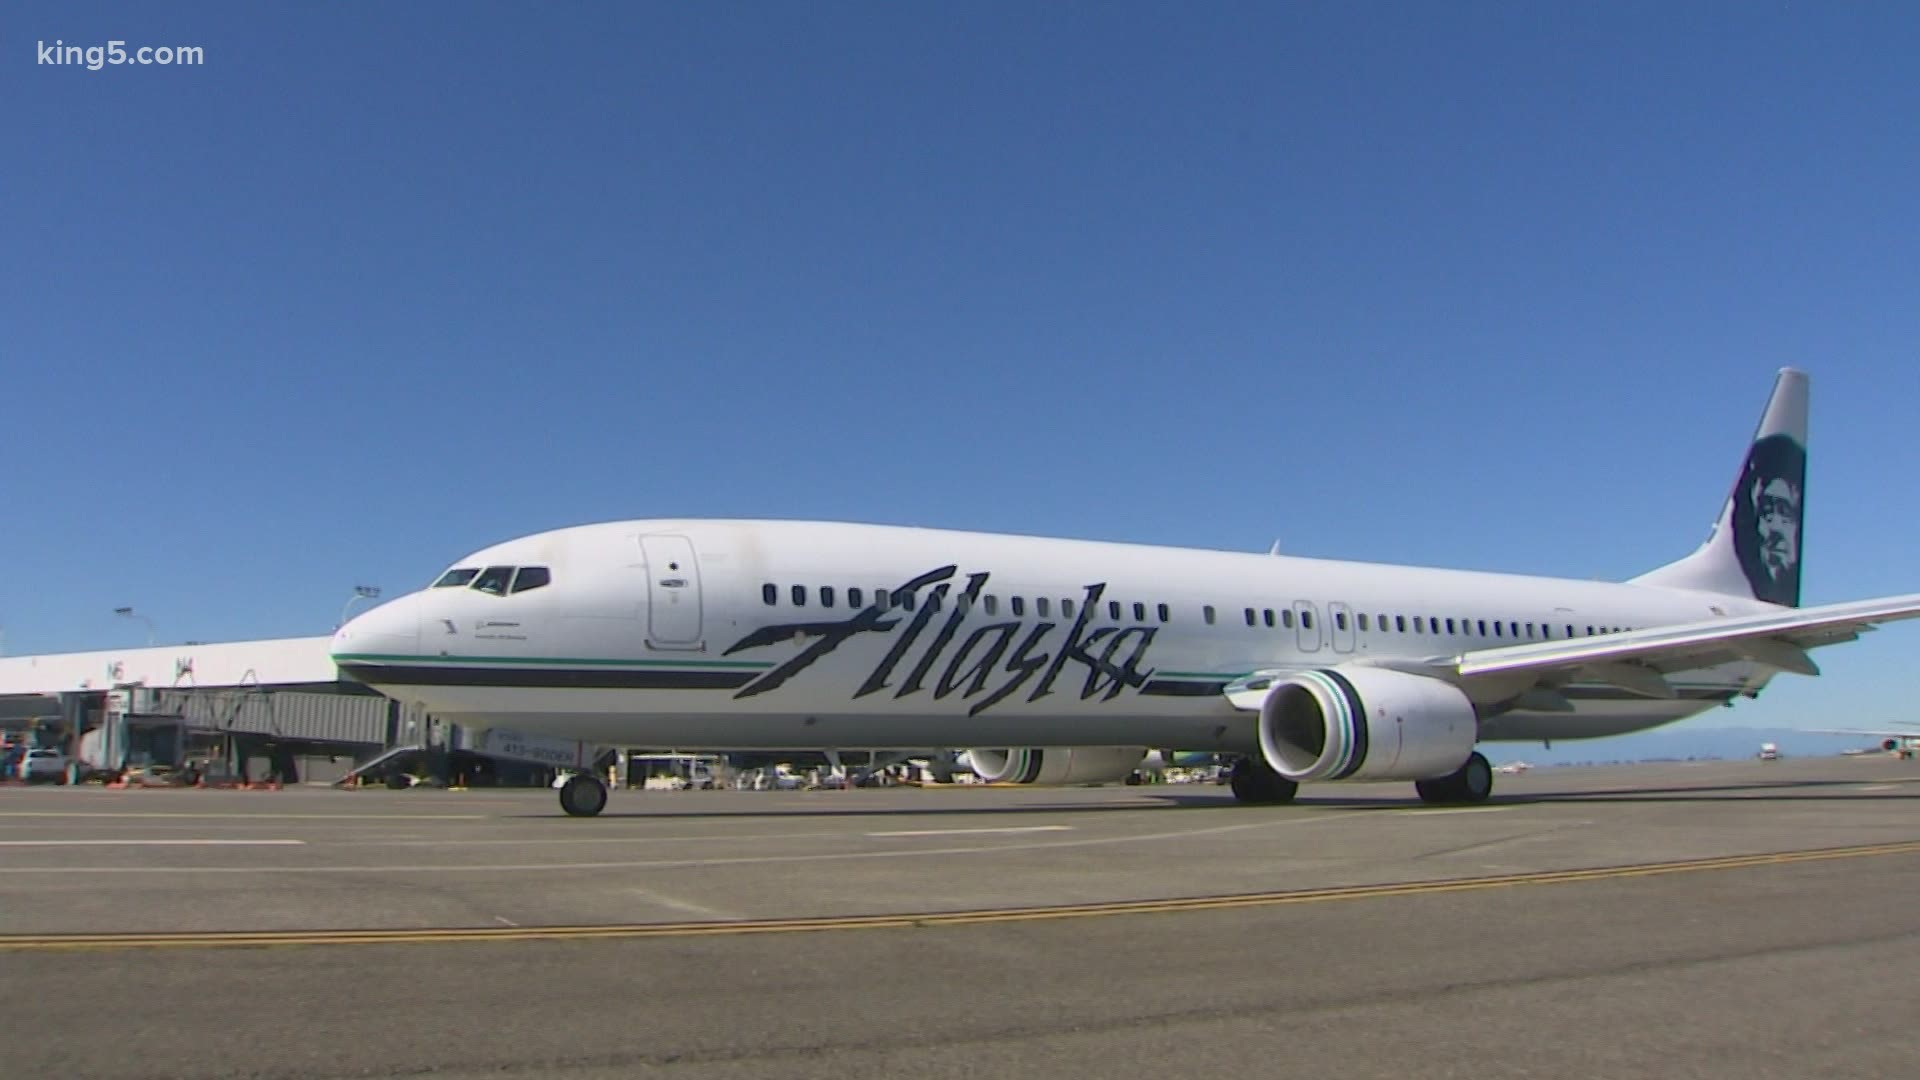 The president of Alaska Airlines said he expects bookings to start picking up in the spring, as more people get vaccinated.